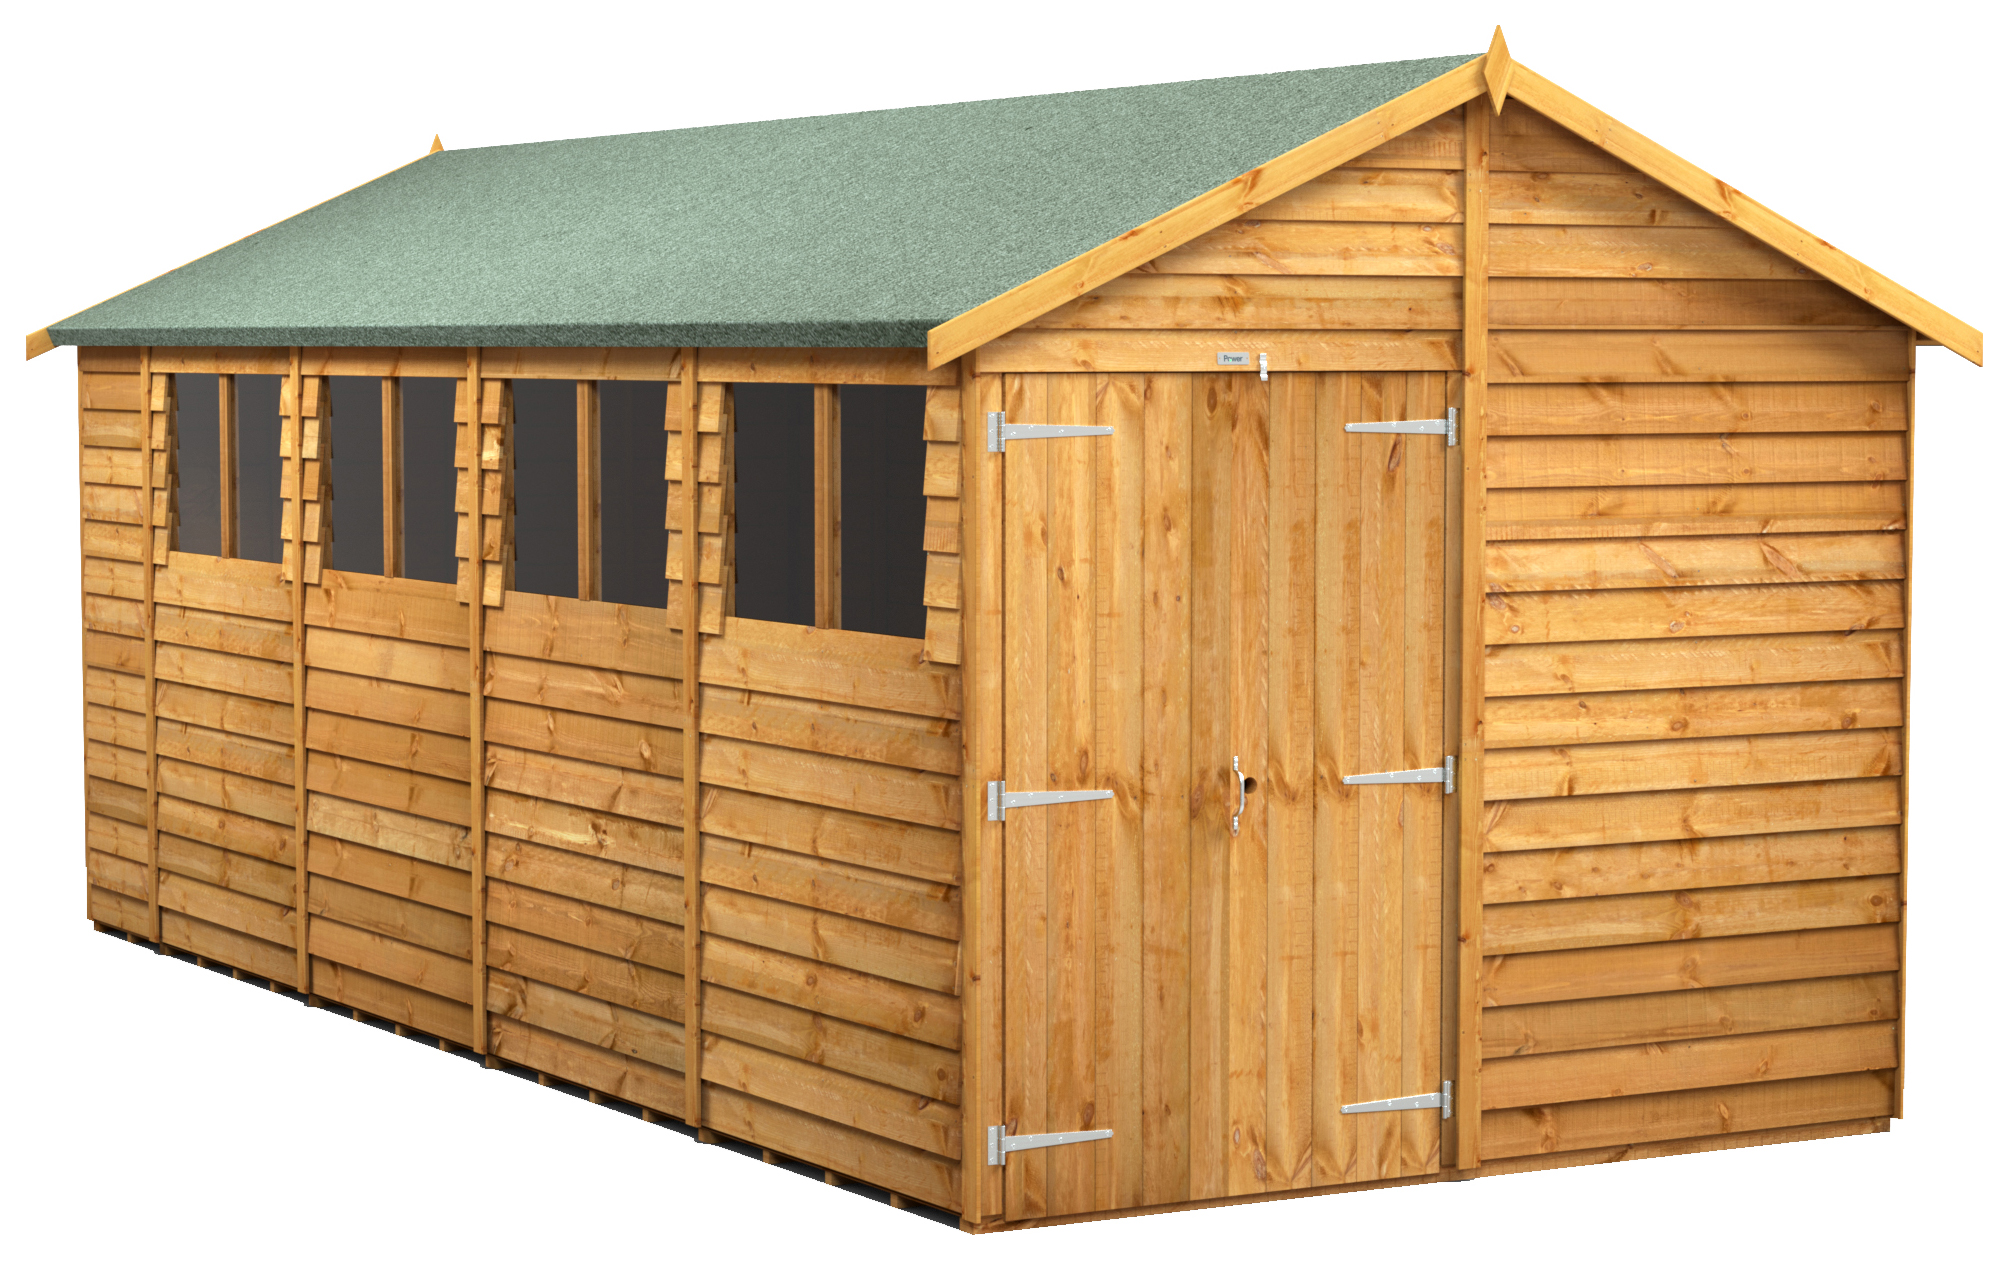 Power Sheds Double Door Apex Overlap Dip Treated Shed - 18 x 8ft